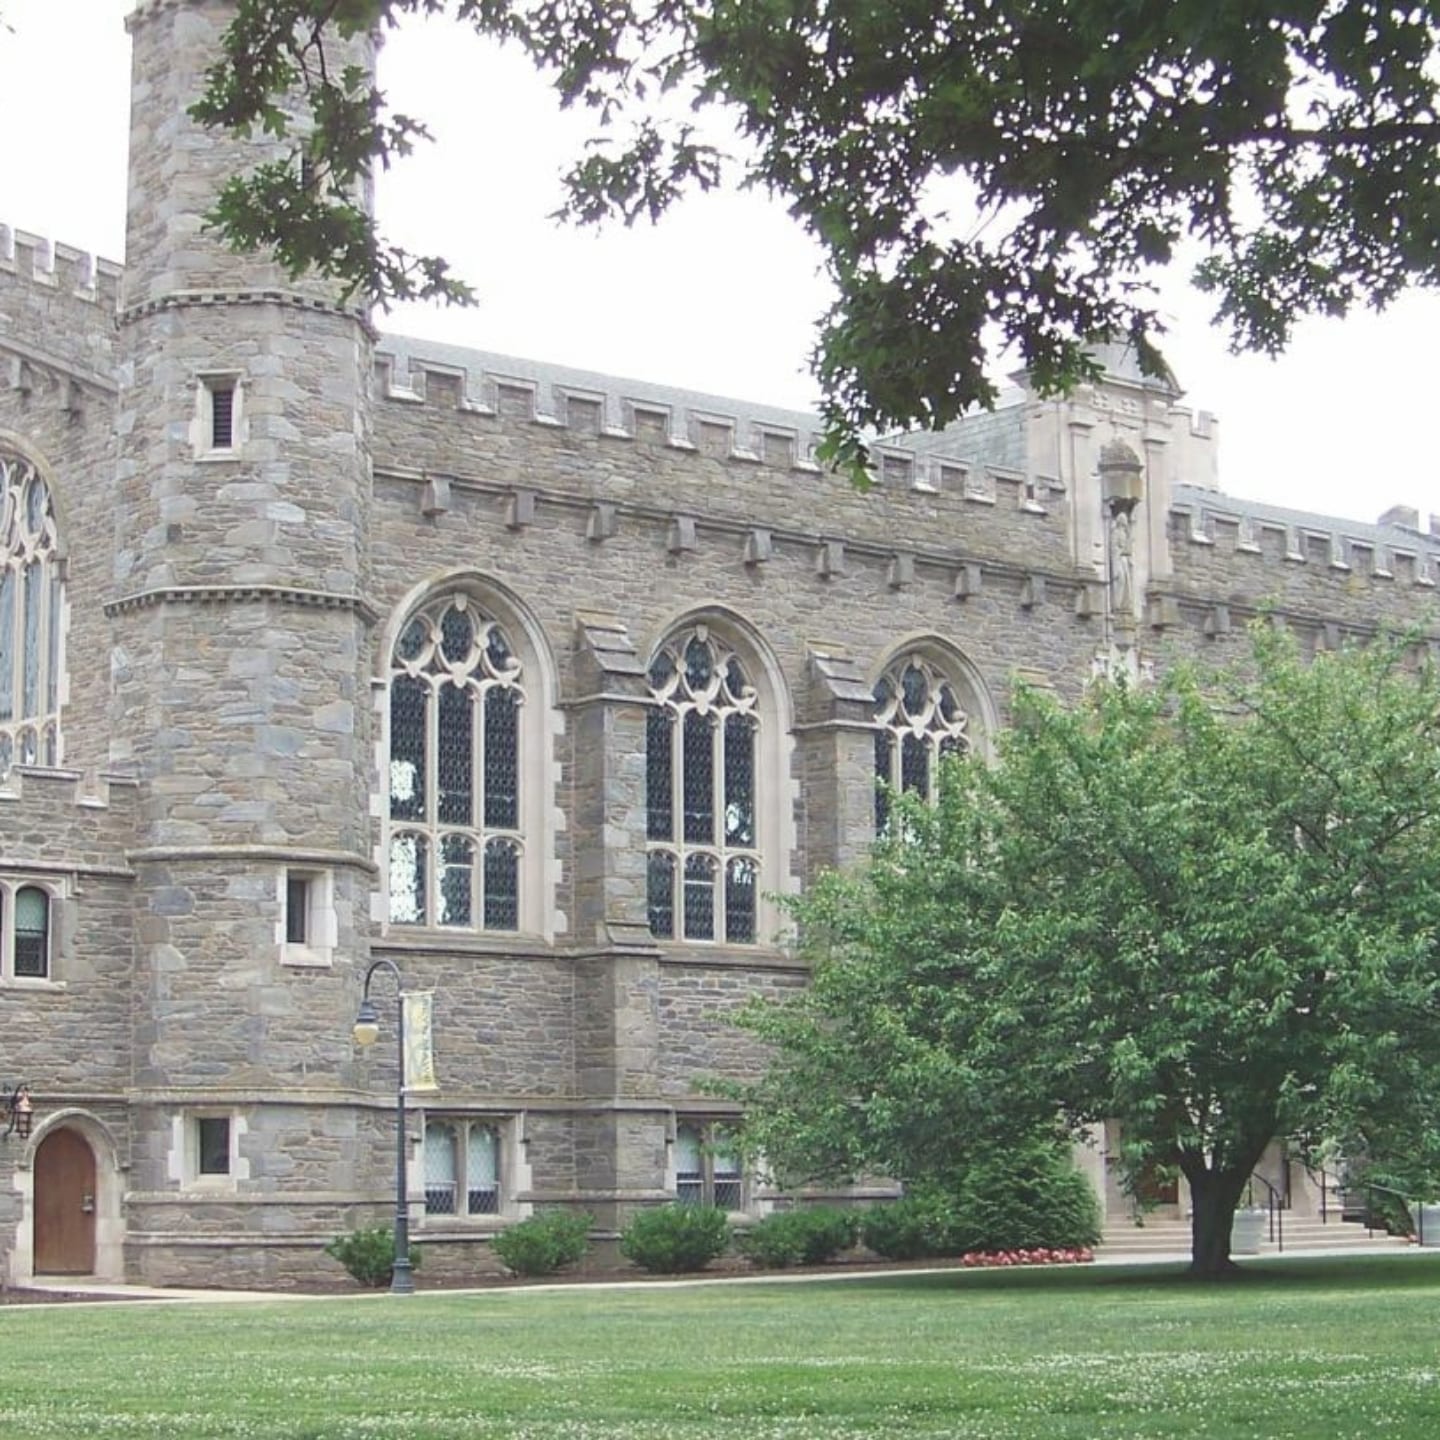 Stone building on the campus of Bryn Mawr College